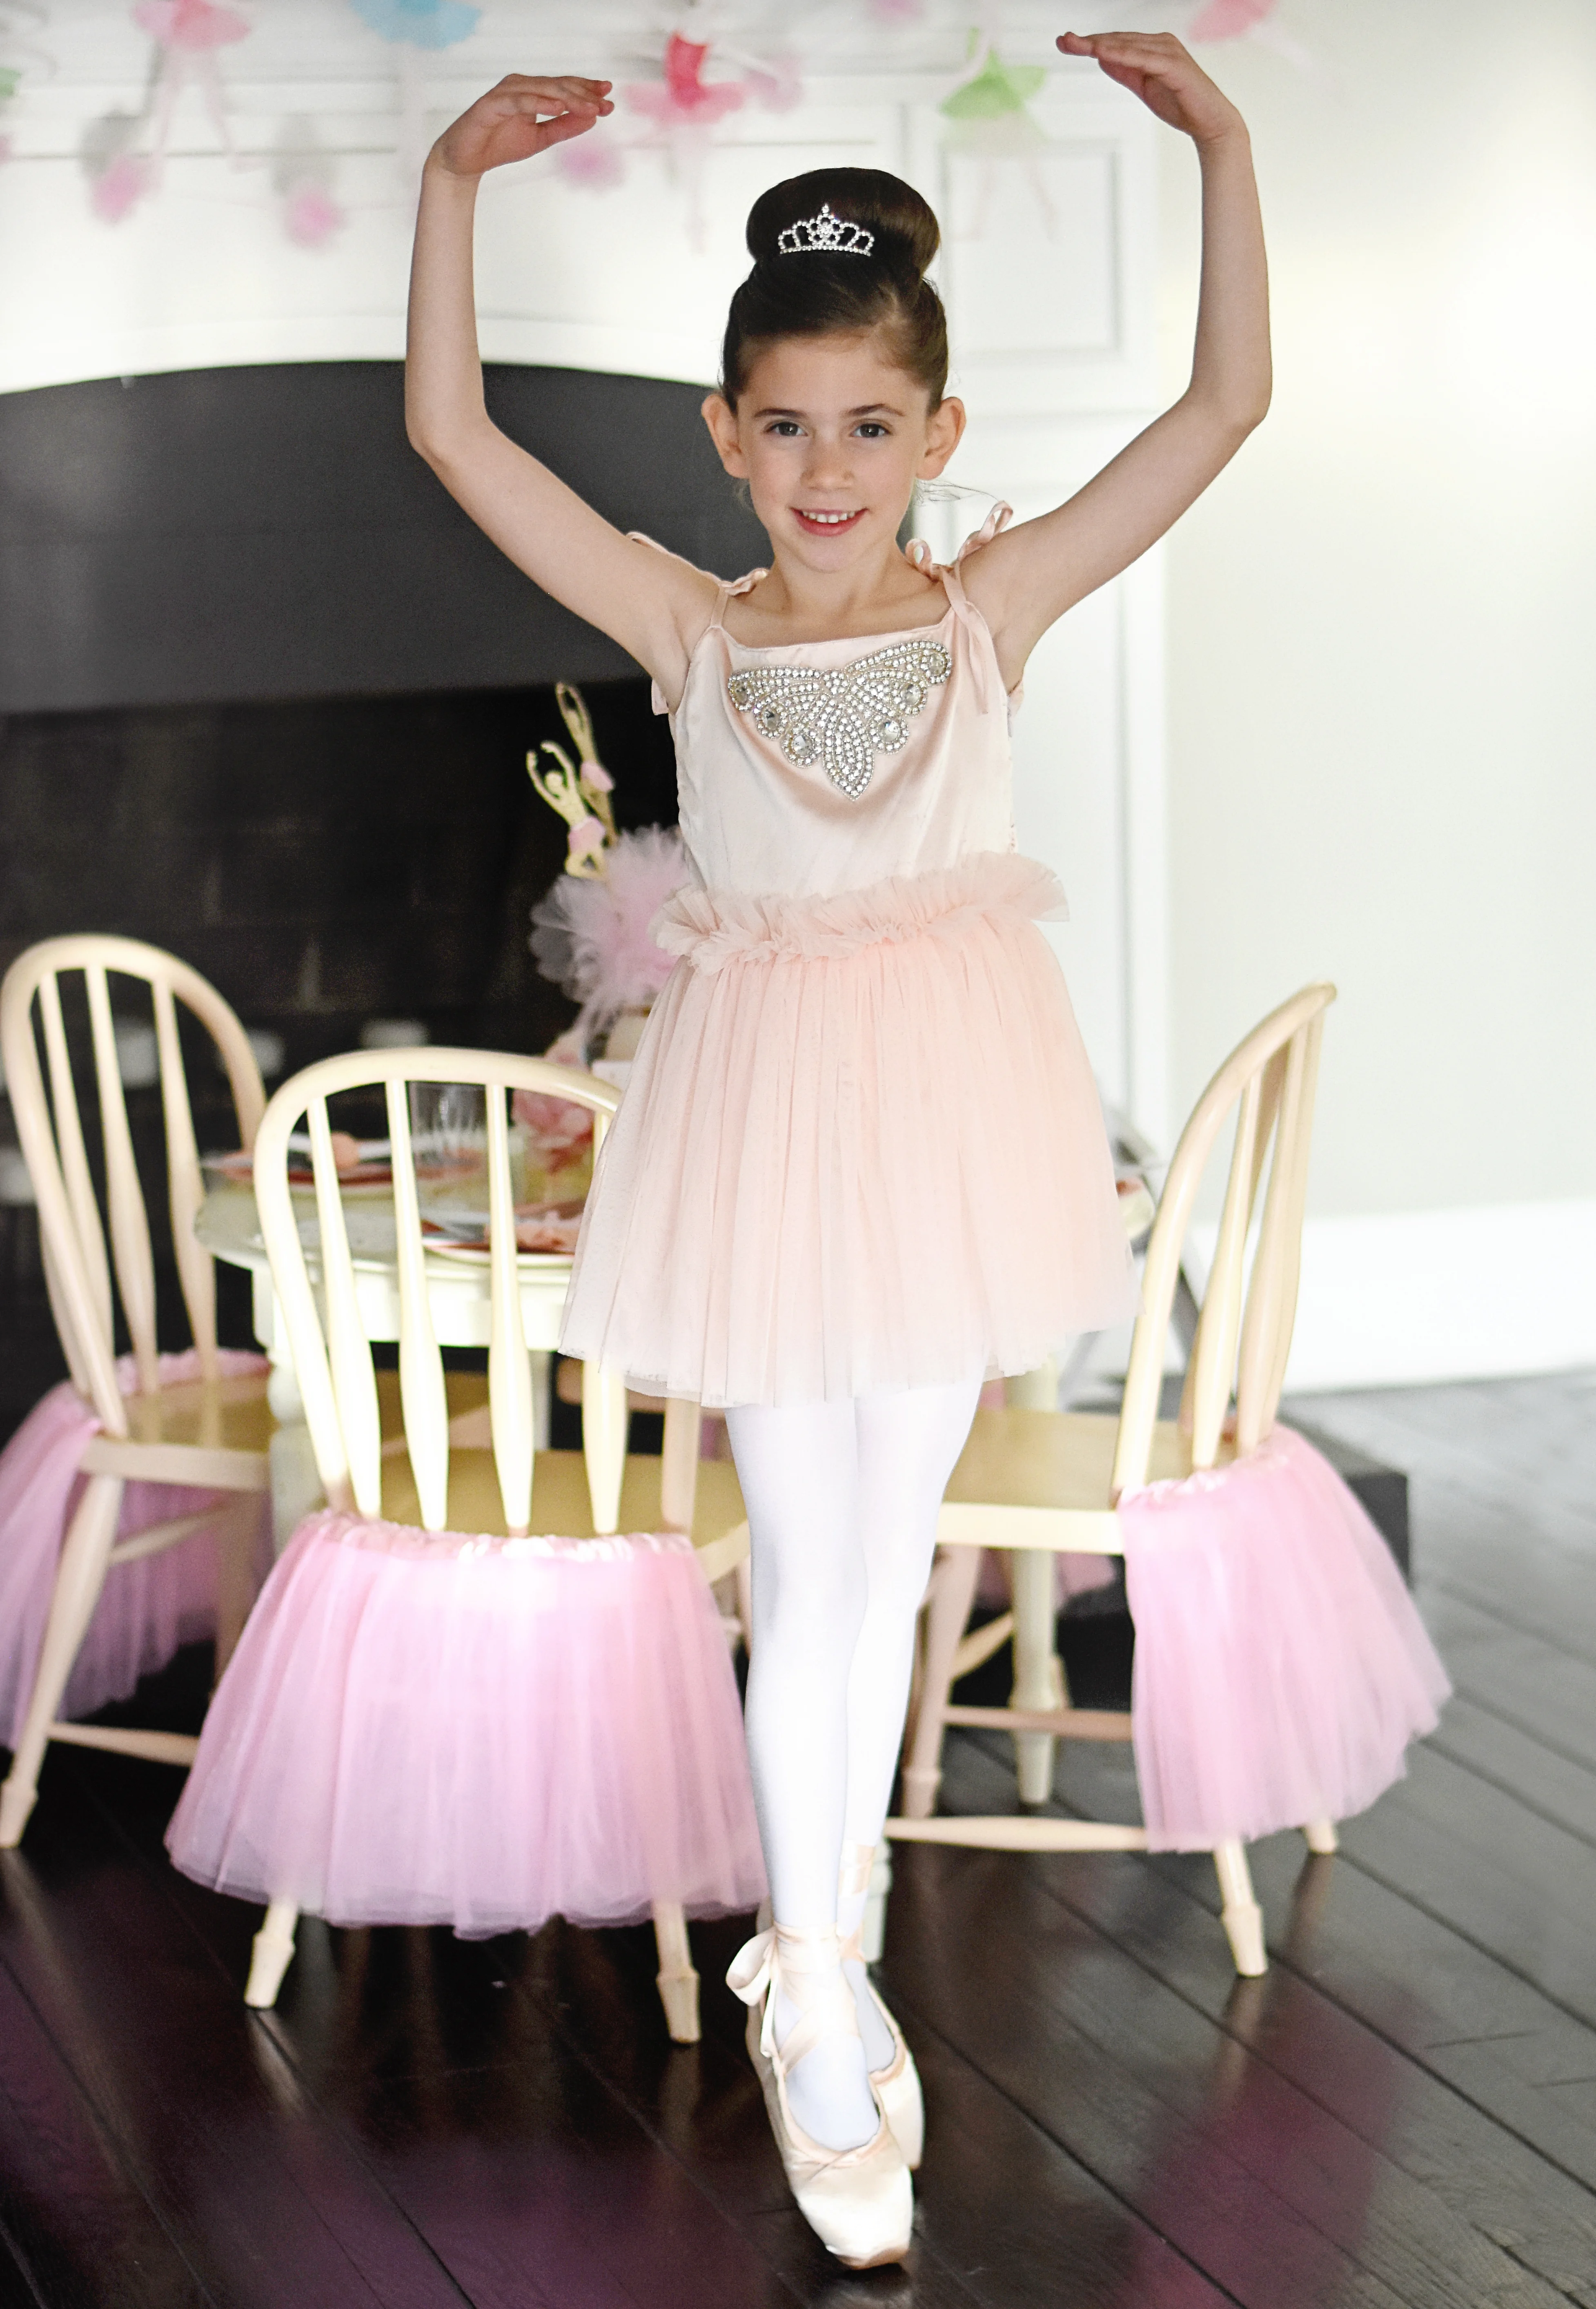 This 'tutu" cute ballerina party is "On Pointe!"